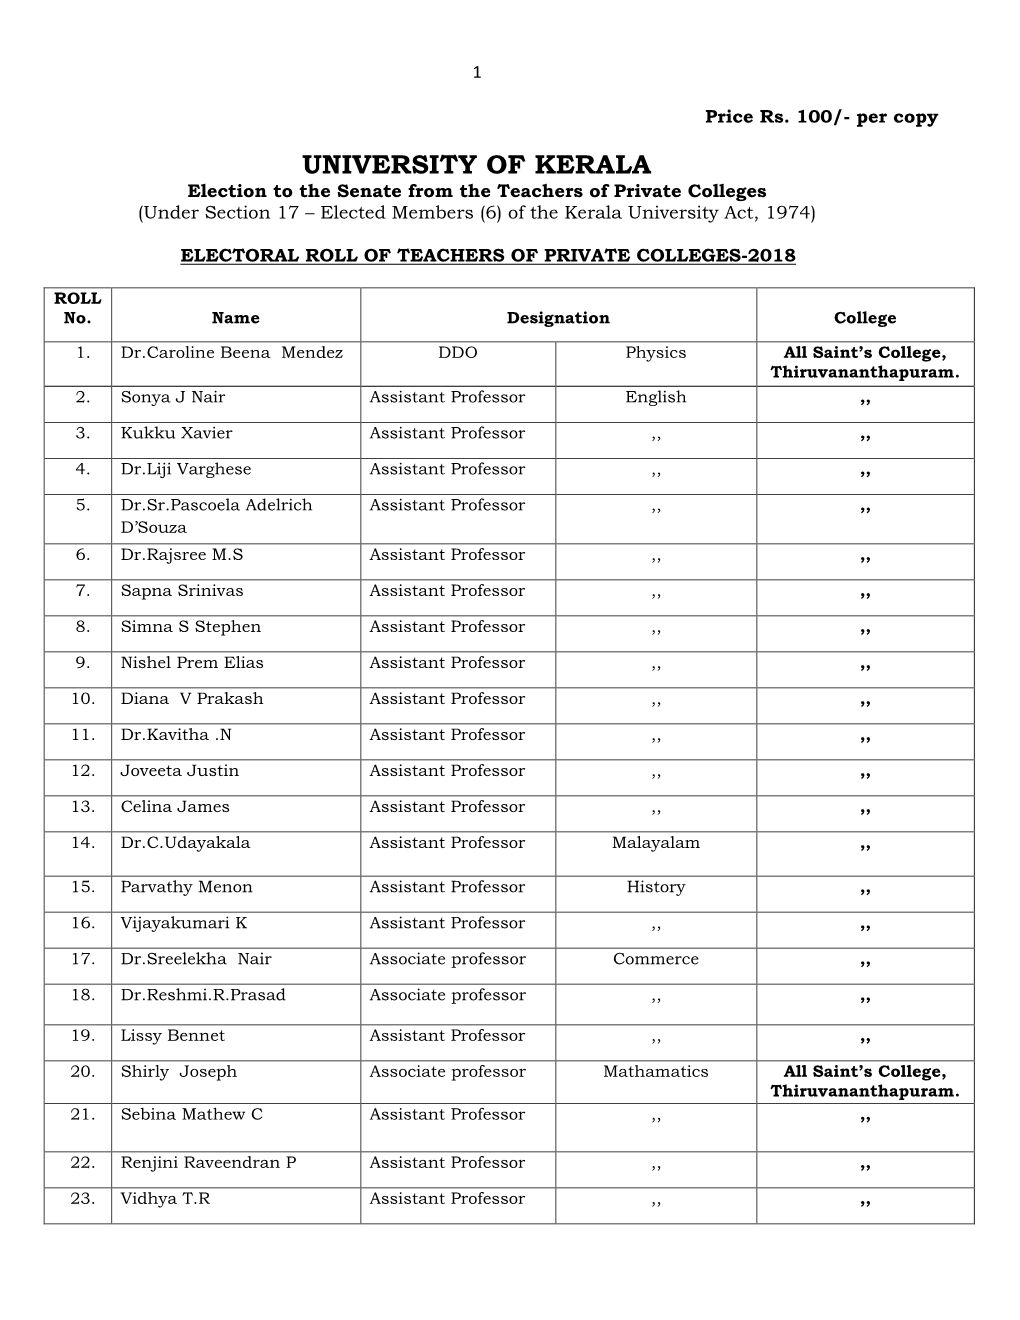 UNIVERSITY of KERALA Election to the Senate from the Teachers of Private Colleges (Under Section 17 – Elected Members (6) of the Kerala University Act, 1974)